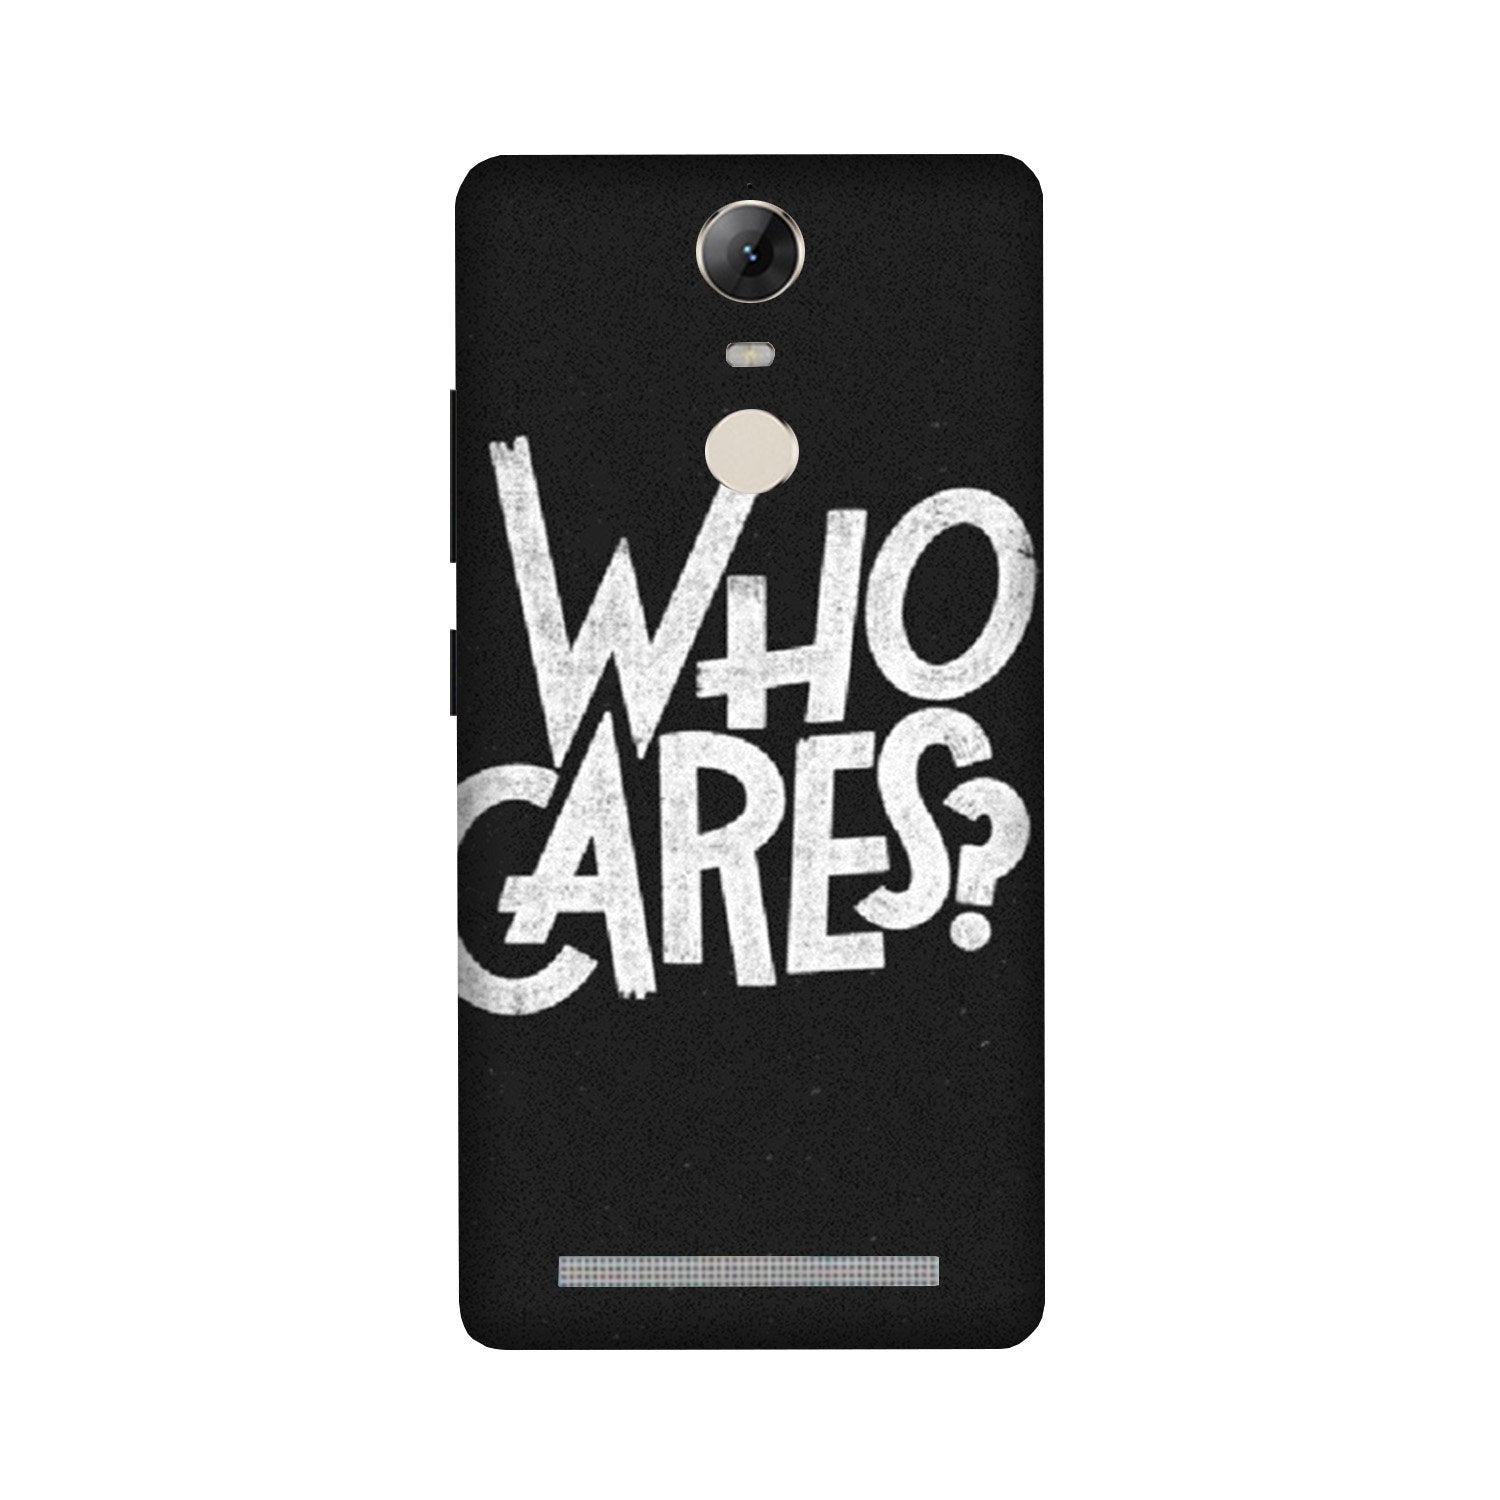 Who Cares Case for Lenovo Vibe K5 Note